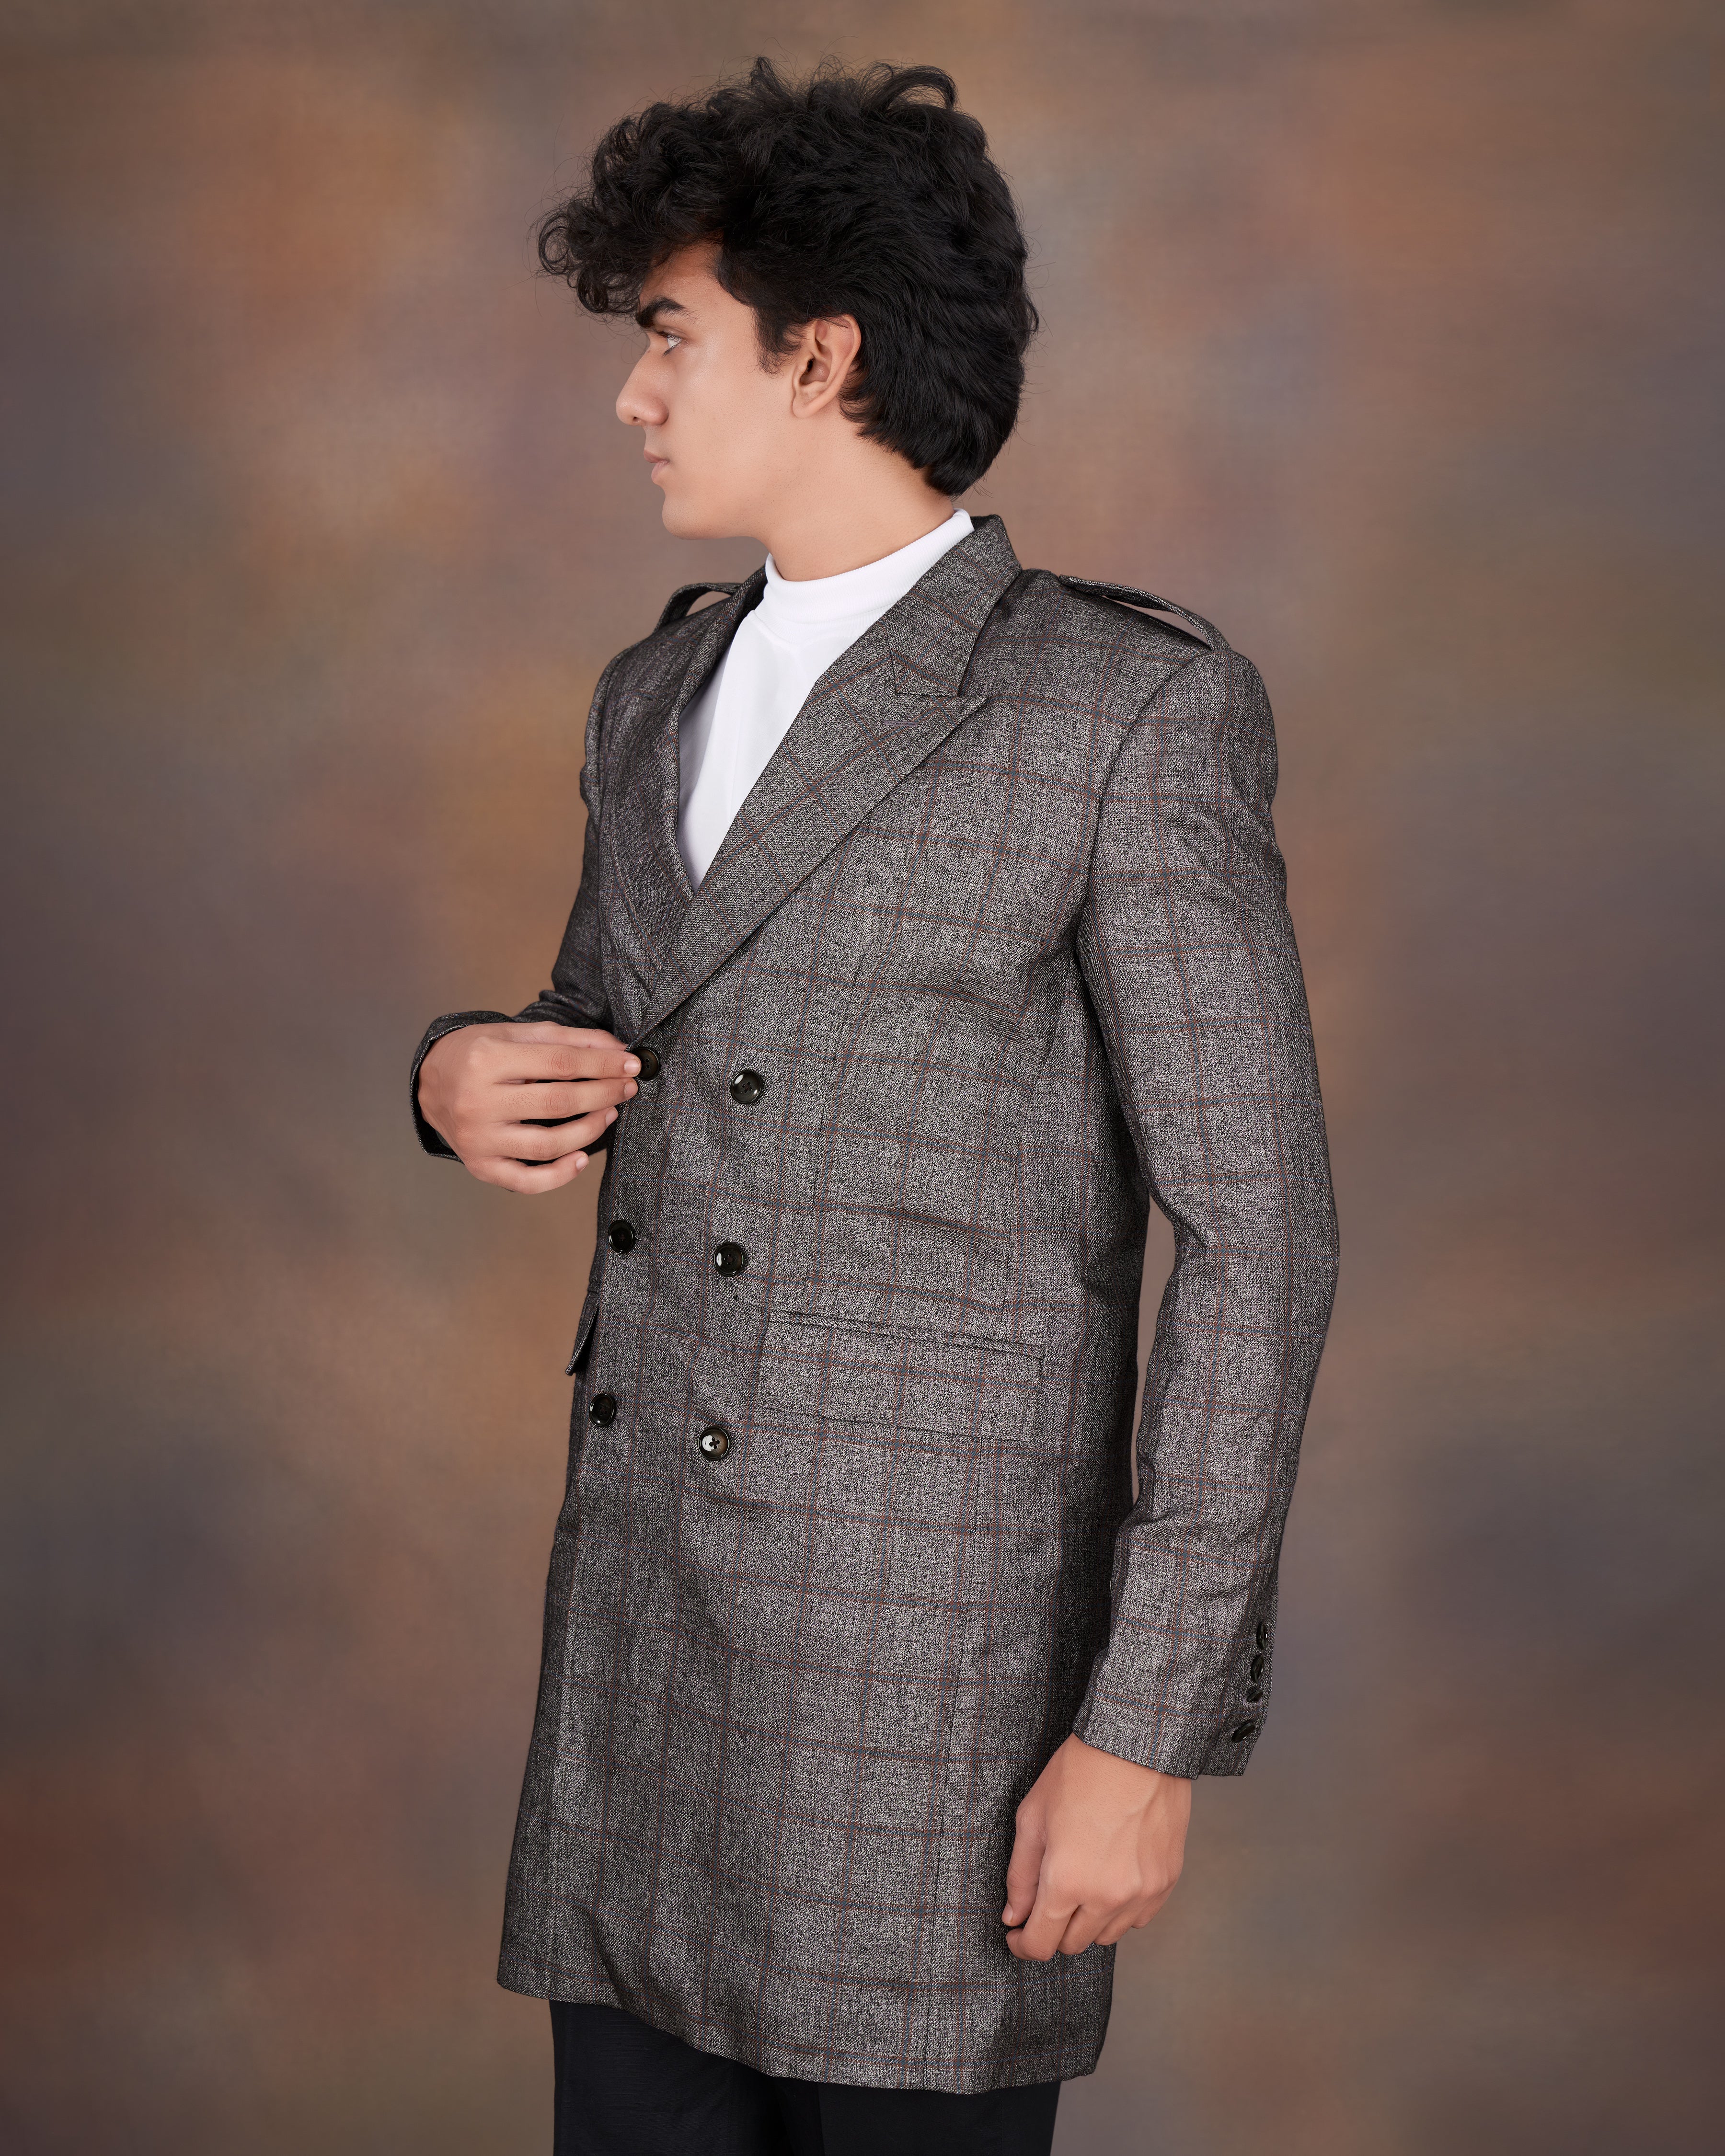 Fuscous Gray Windowpane Double Breasted Designer Trench Coat TCB2320-D202-36, TCB2320-D202-38, TCB2320-D202-40, TCB2320-D202-42, TCB2320-D202-44, TCB2320-D202-46, TCB2320-D202-48, TCB2320-D202-50, TCB2320-D202-52, TCB2320-D202-54, TCB2320-D202-56, TCB2320-D202-58, TCB2320-D202-60